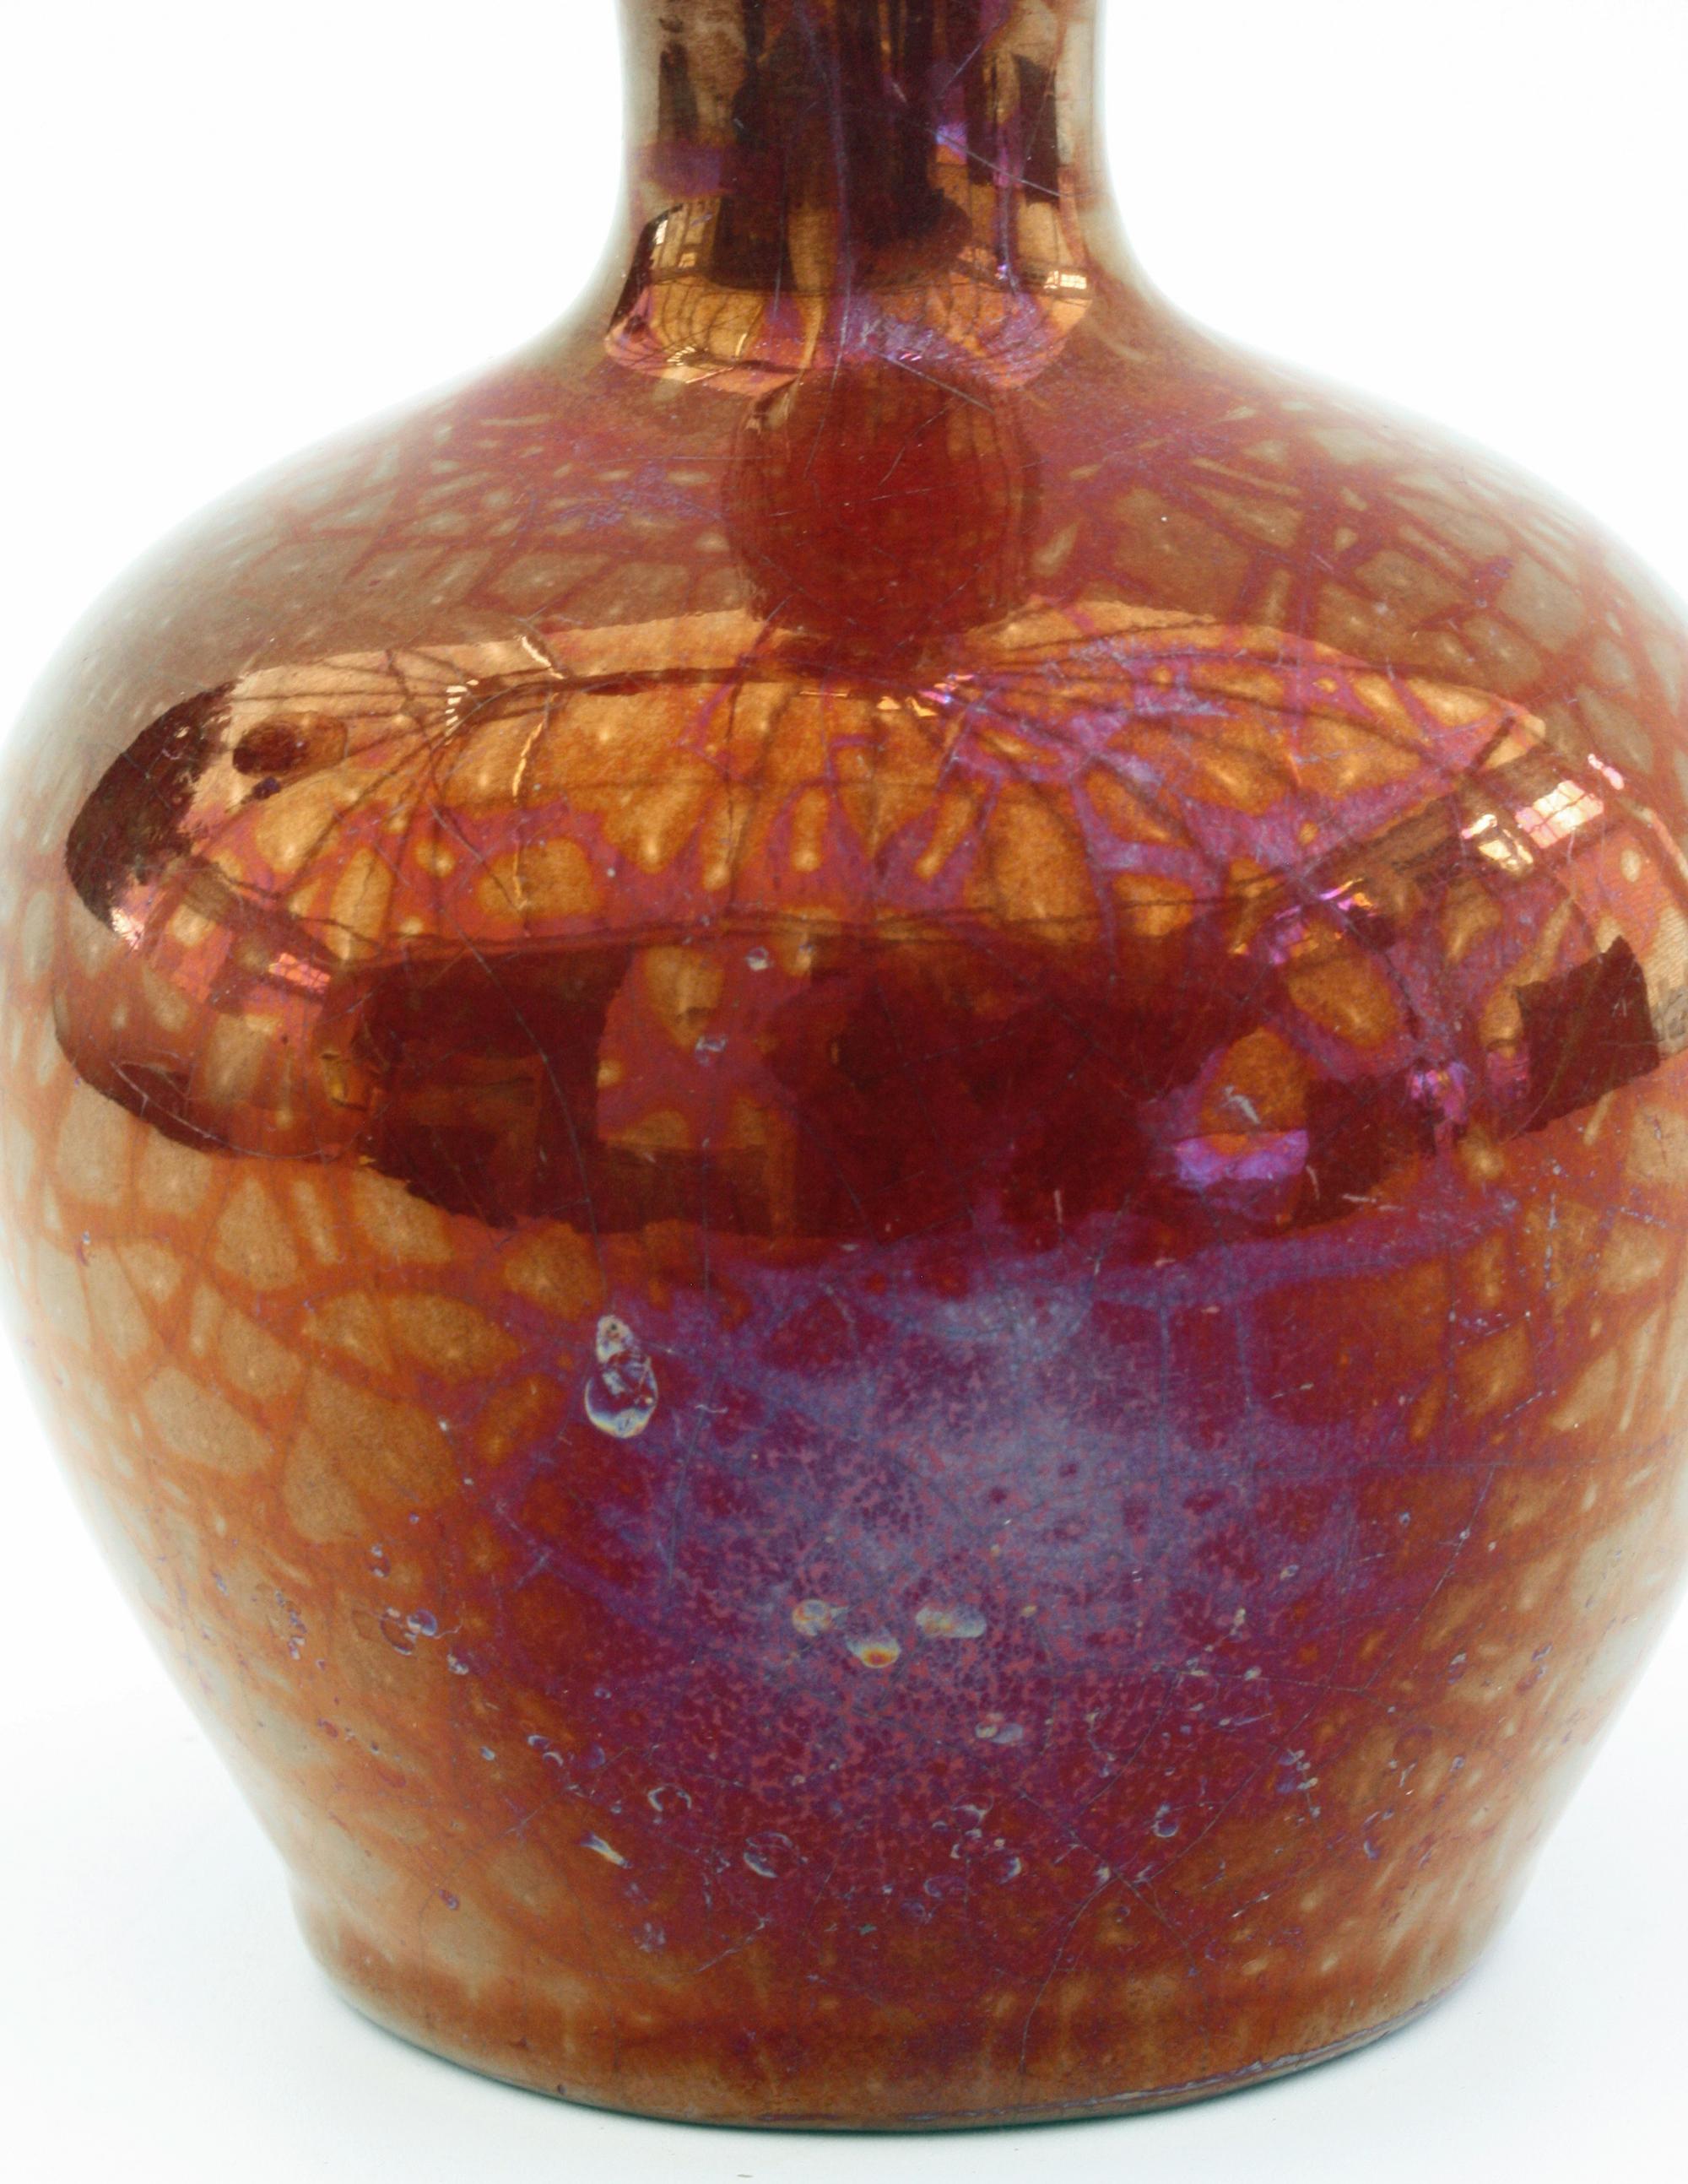 A stylish and lightly potted Arts & Crafts red luster glazed art pottery vase decorated with a spider web design dating from circa 1900. The small rounded bulbous shaped vase has a narrow trumpet shaped neck and is finished in beautiful red luster